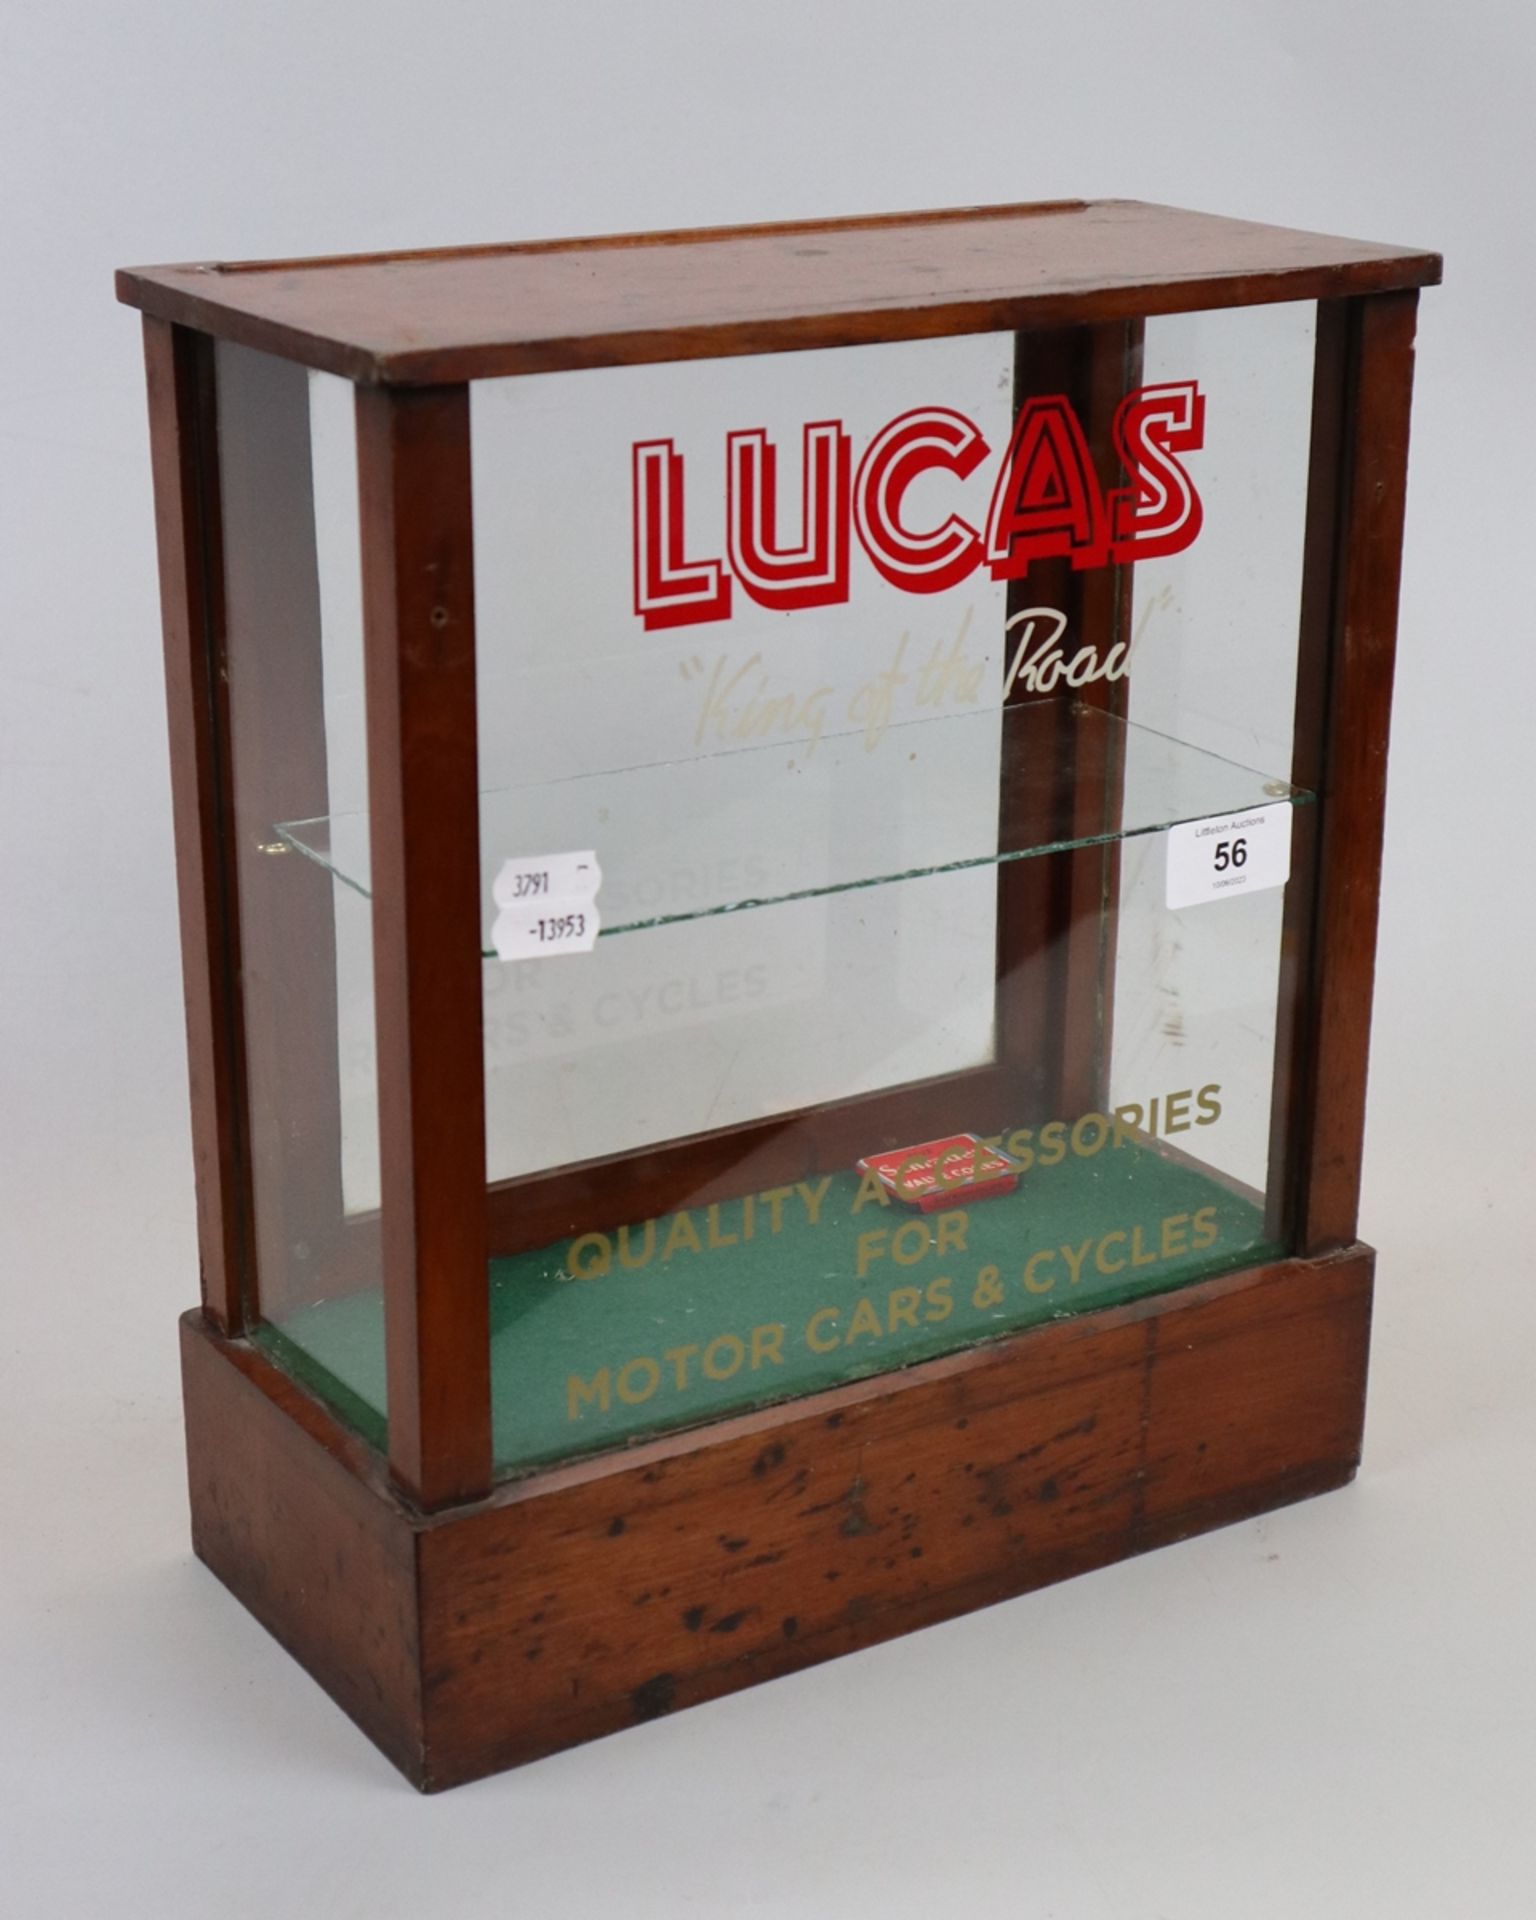 Lucas accessories counter top display cabinet - Image 4 of 6